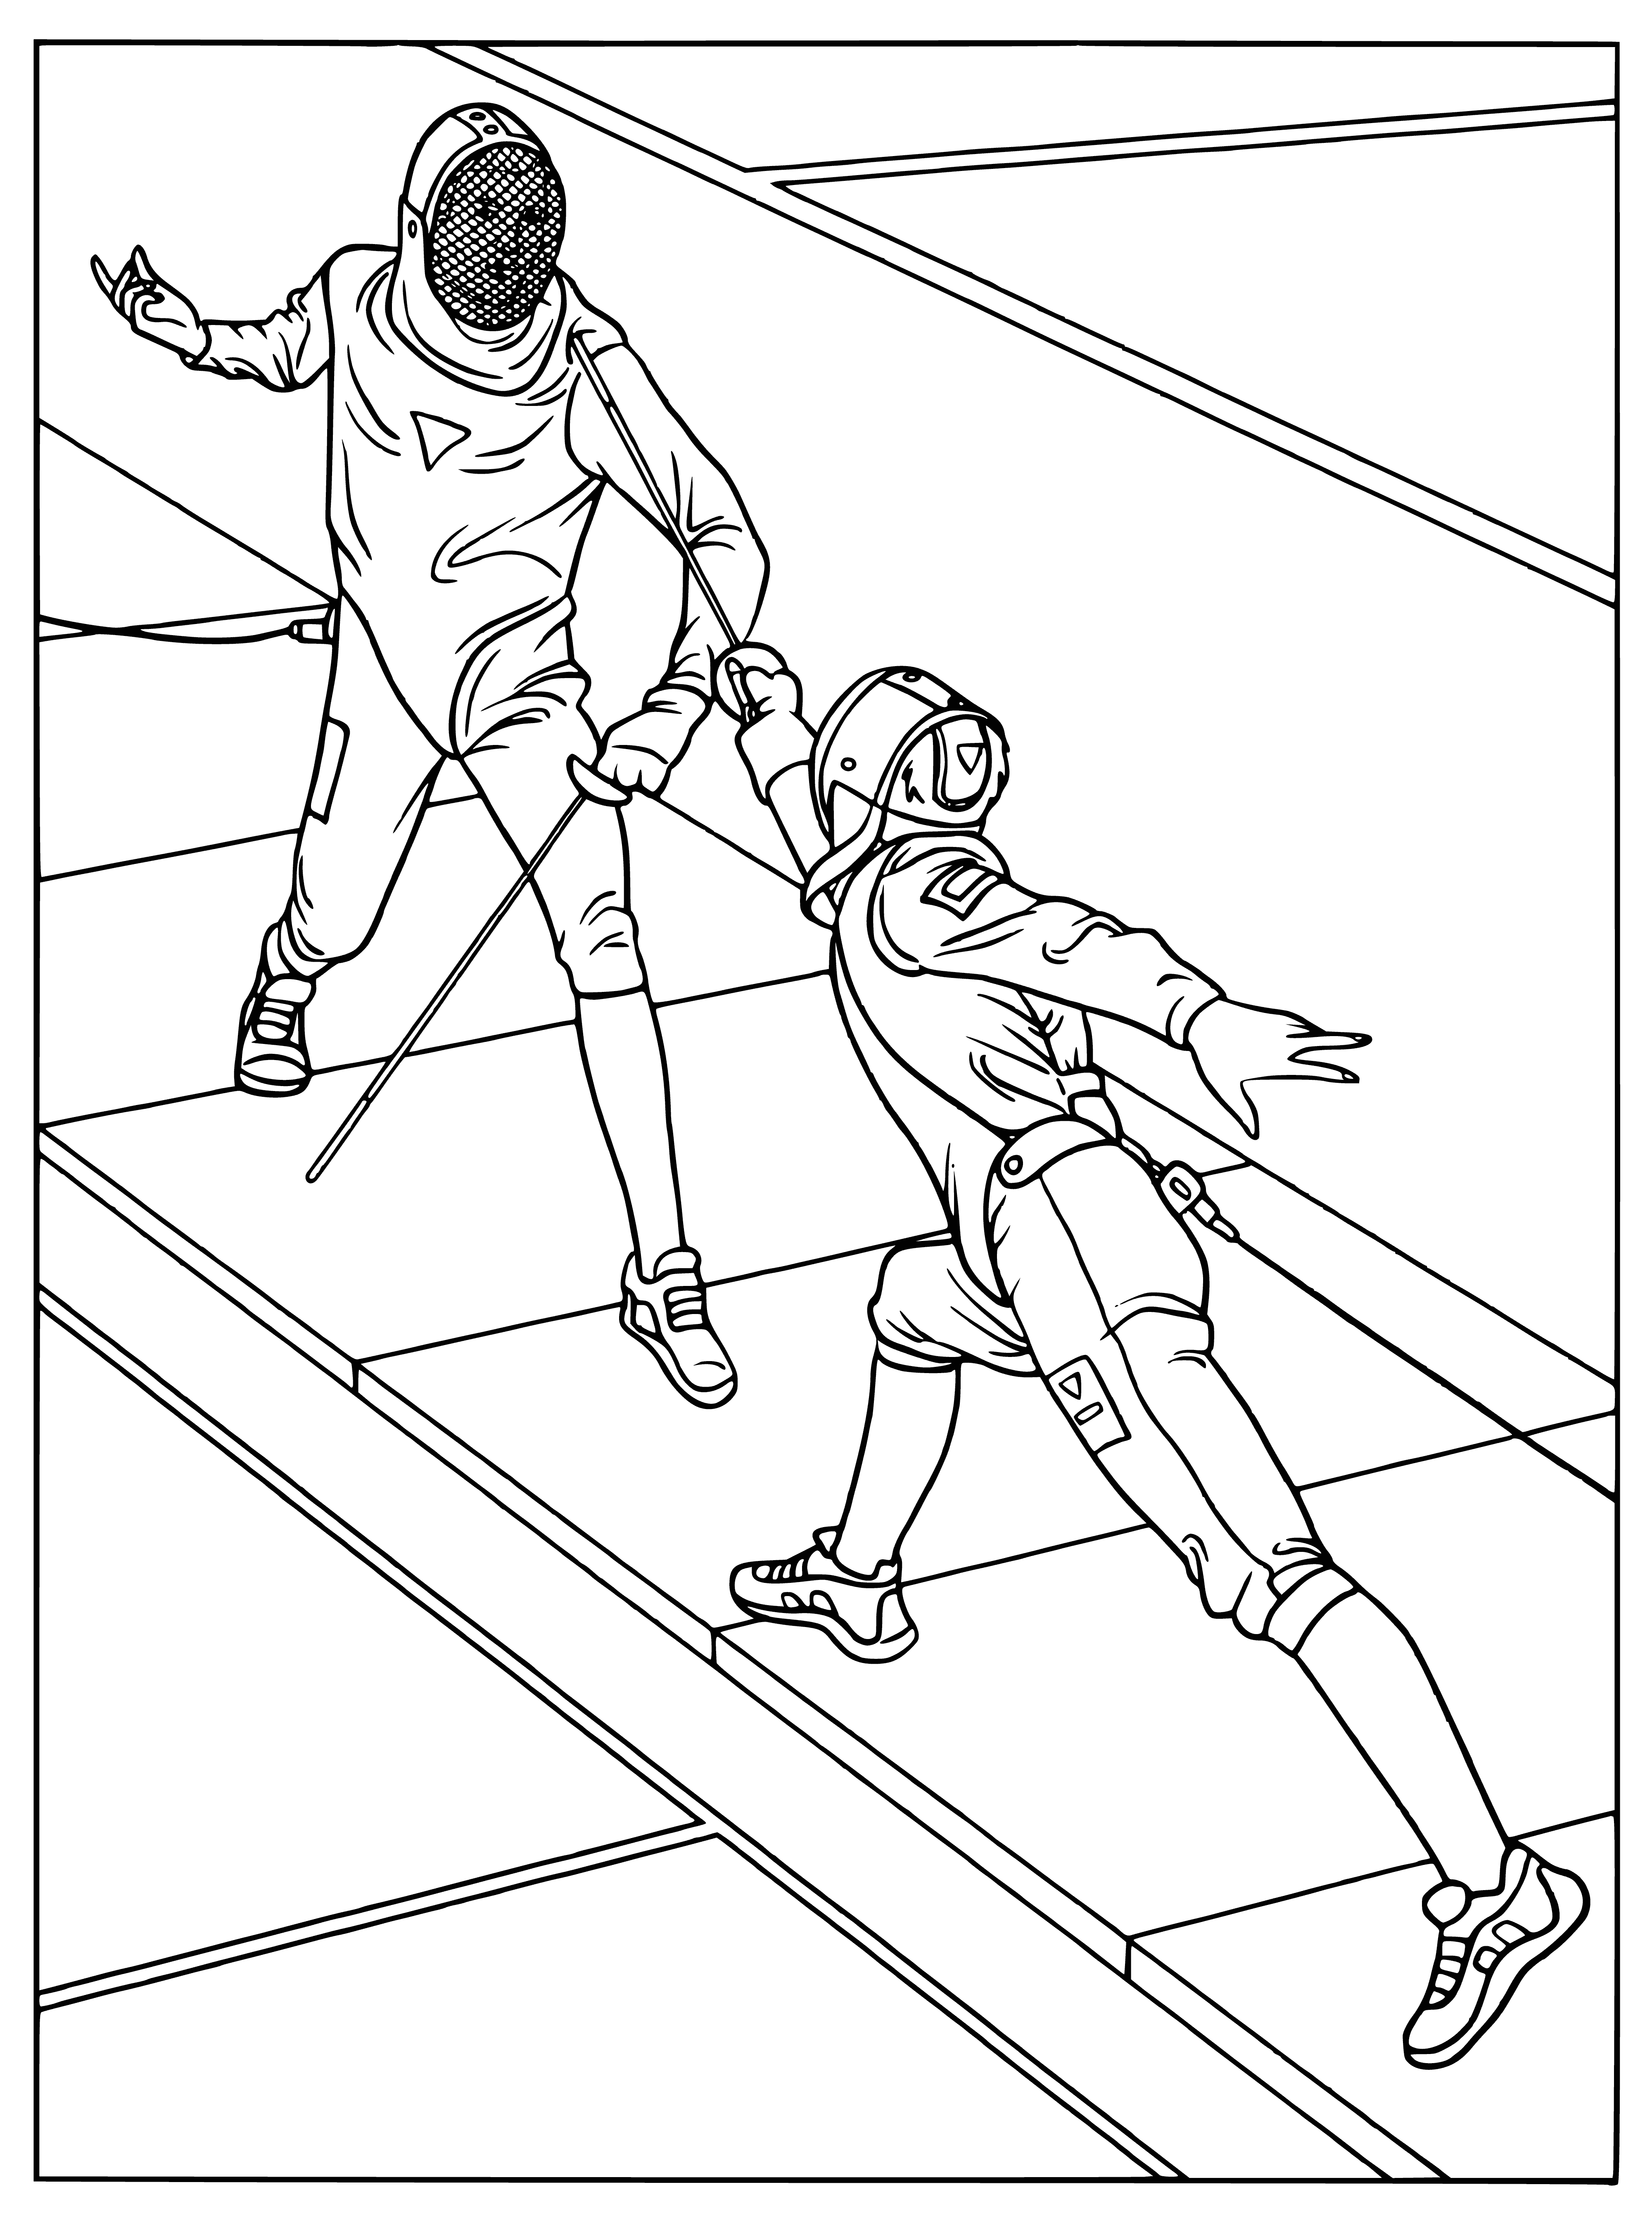 Fencing with epee coloring page